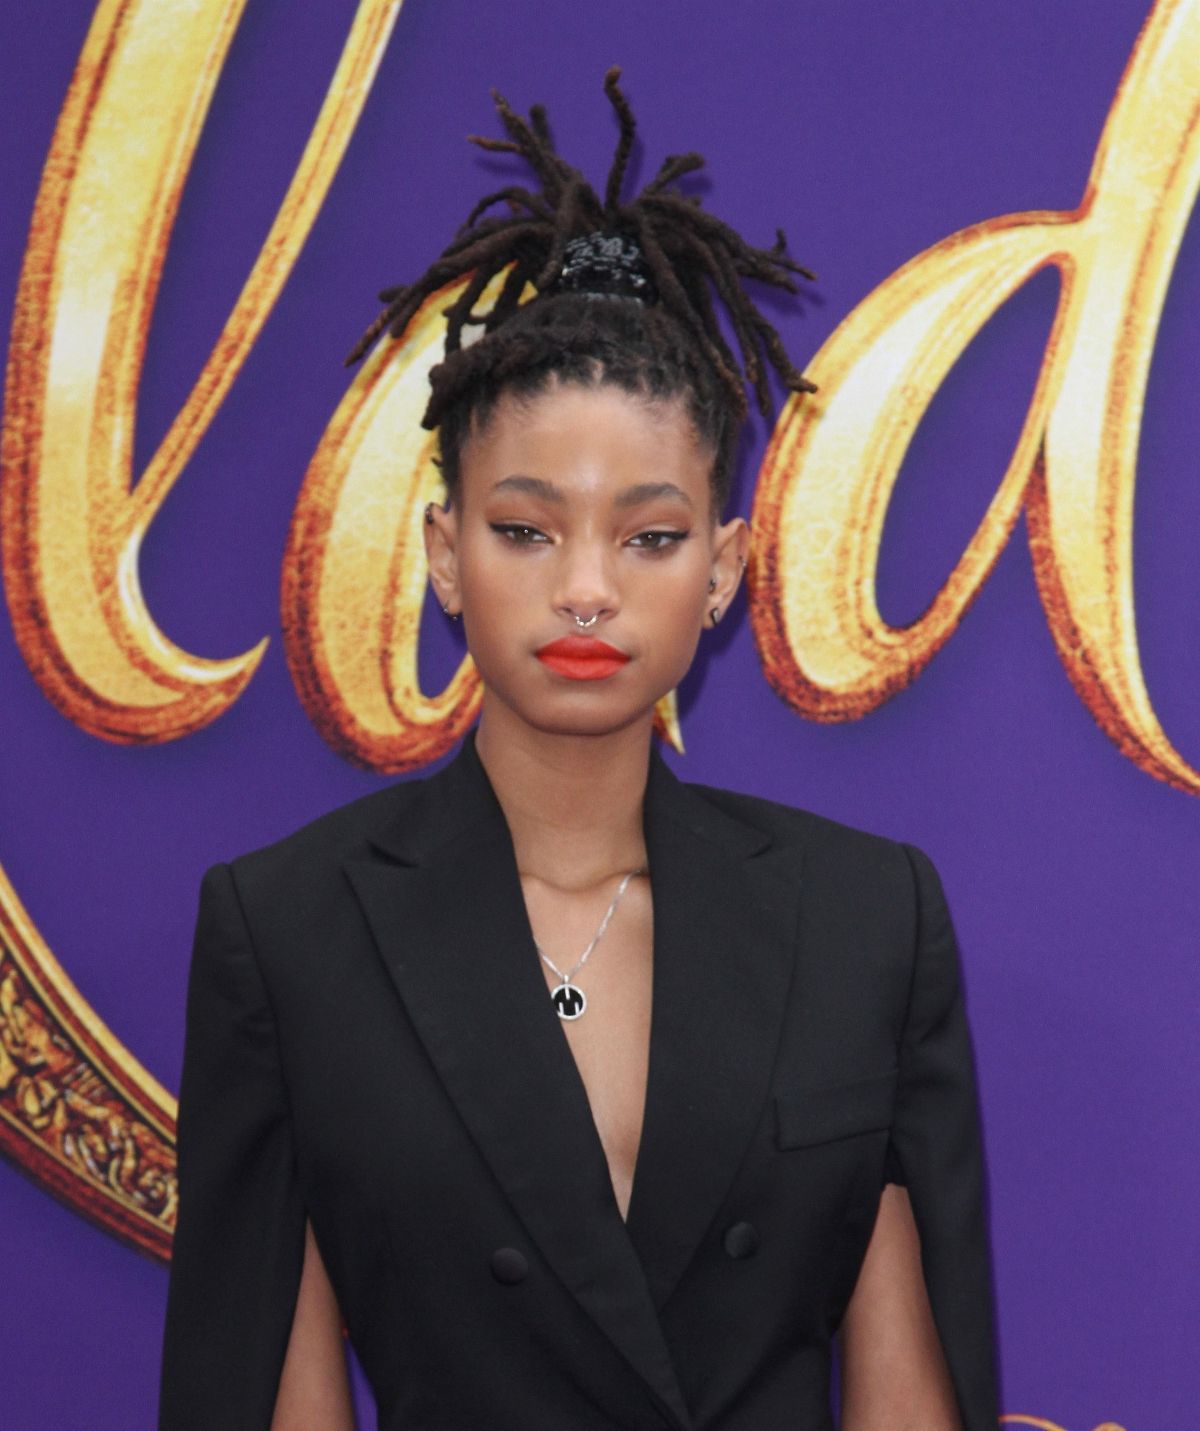 WILLOW SMITH at Aladdin Premiere in Hollywood 05/21/2019 - HawtCelebs